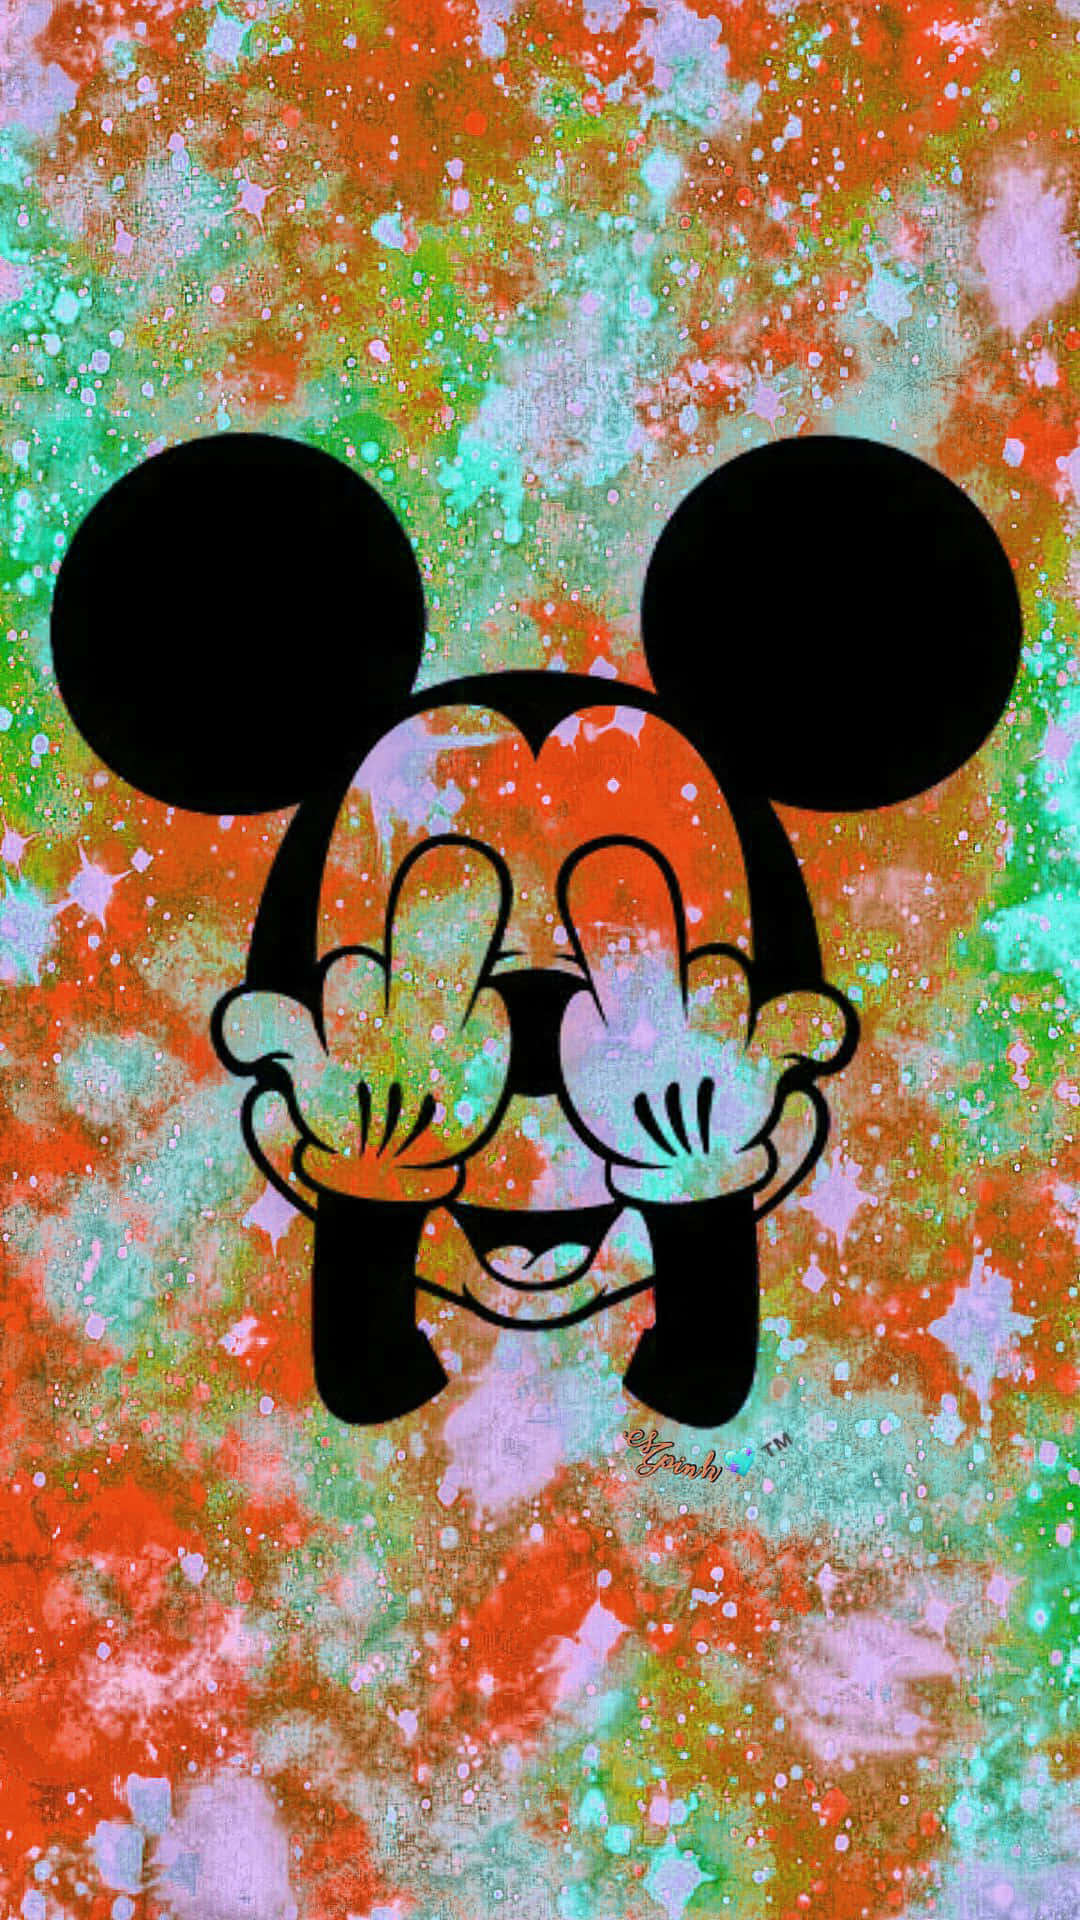 Lookin' Cool, Mickey Mouse! Wallpaper